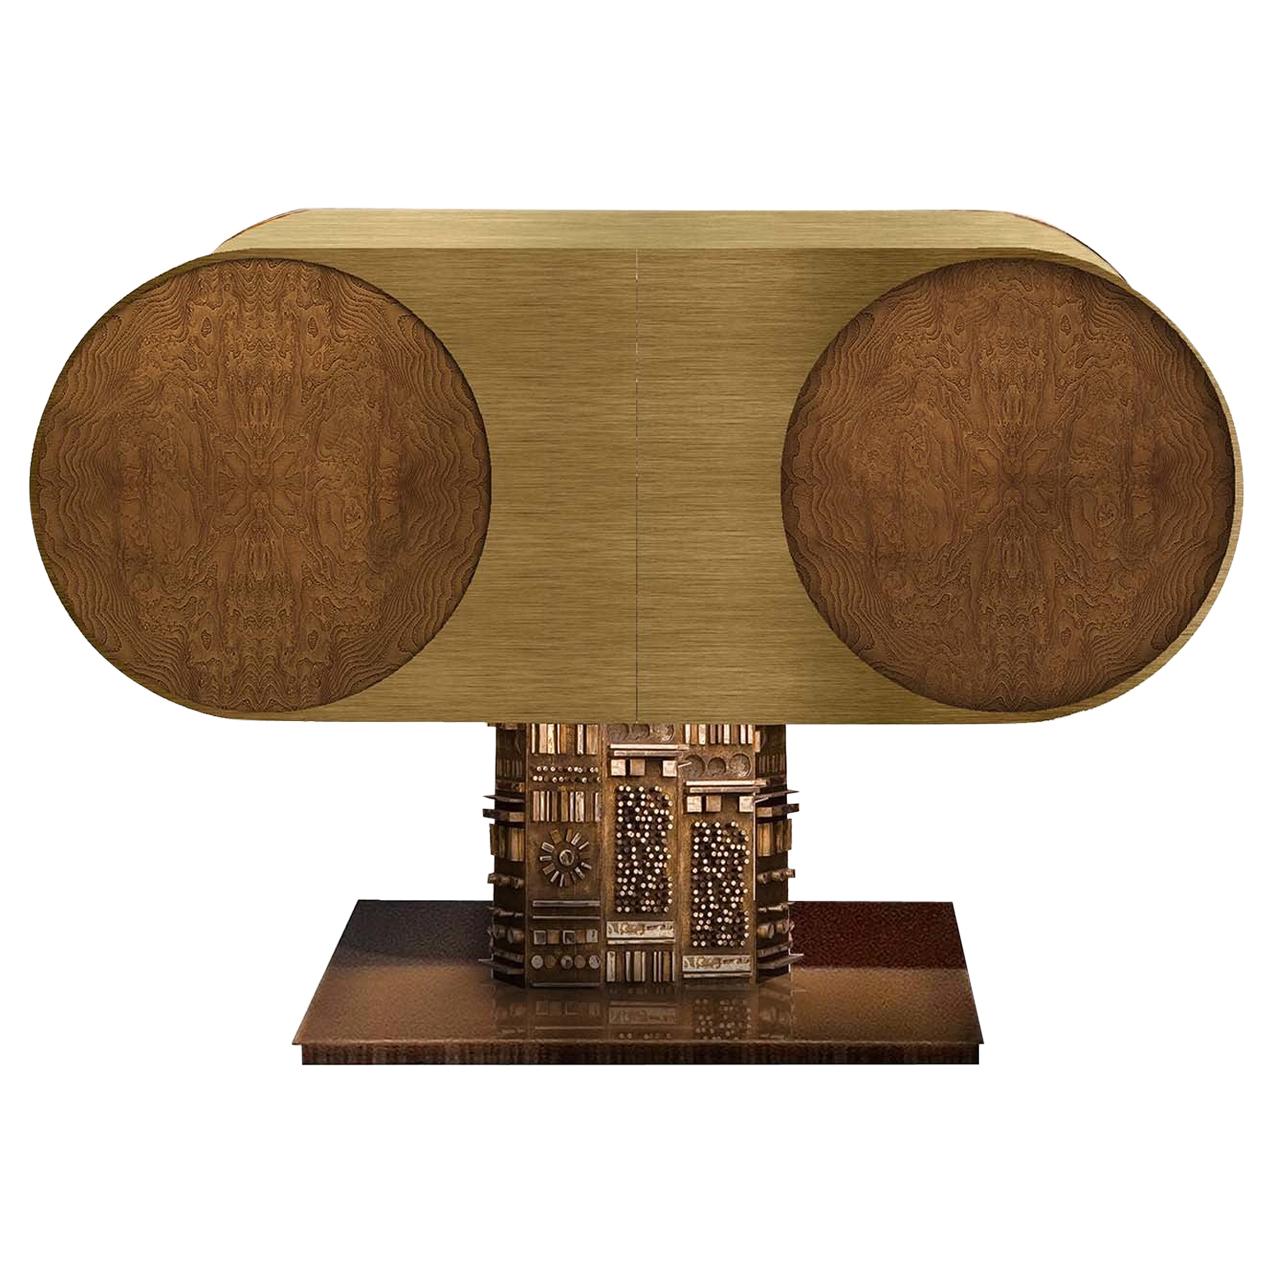 Covent Cabinet by Giuliano Cappelletti and Gian Maria Potenza